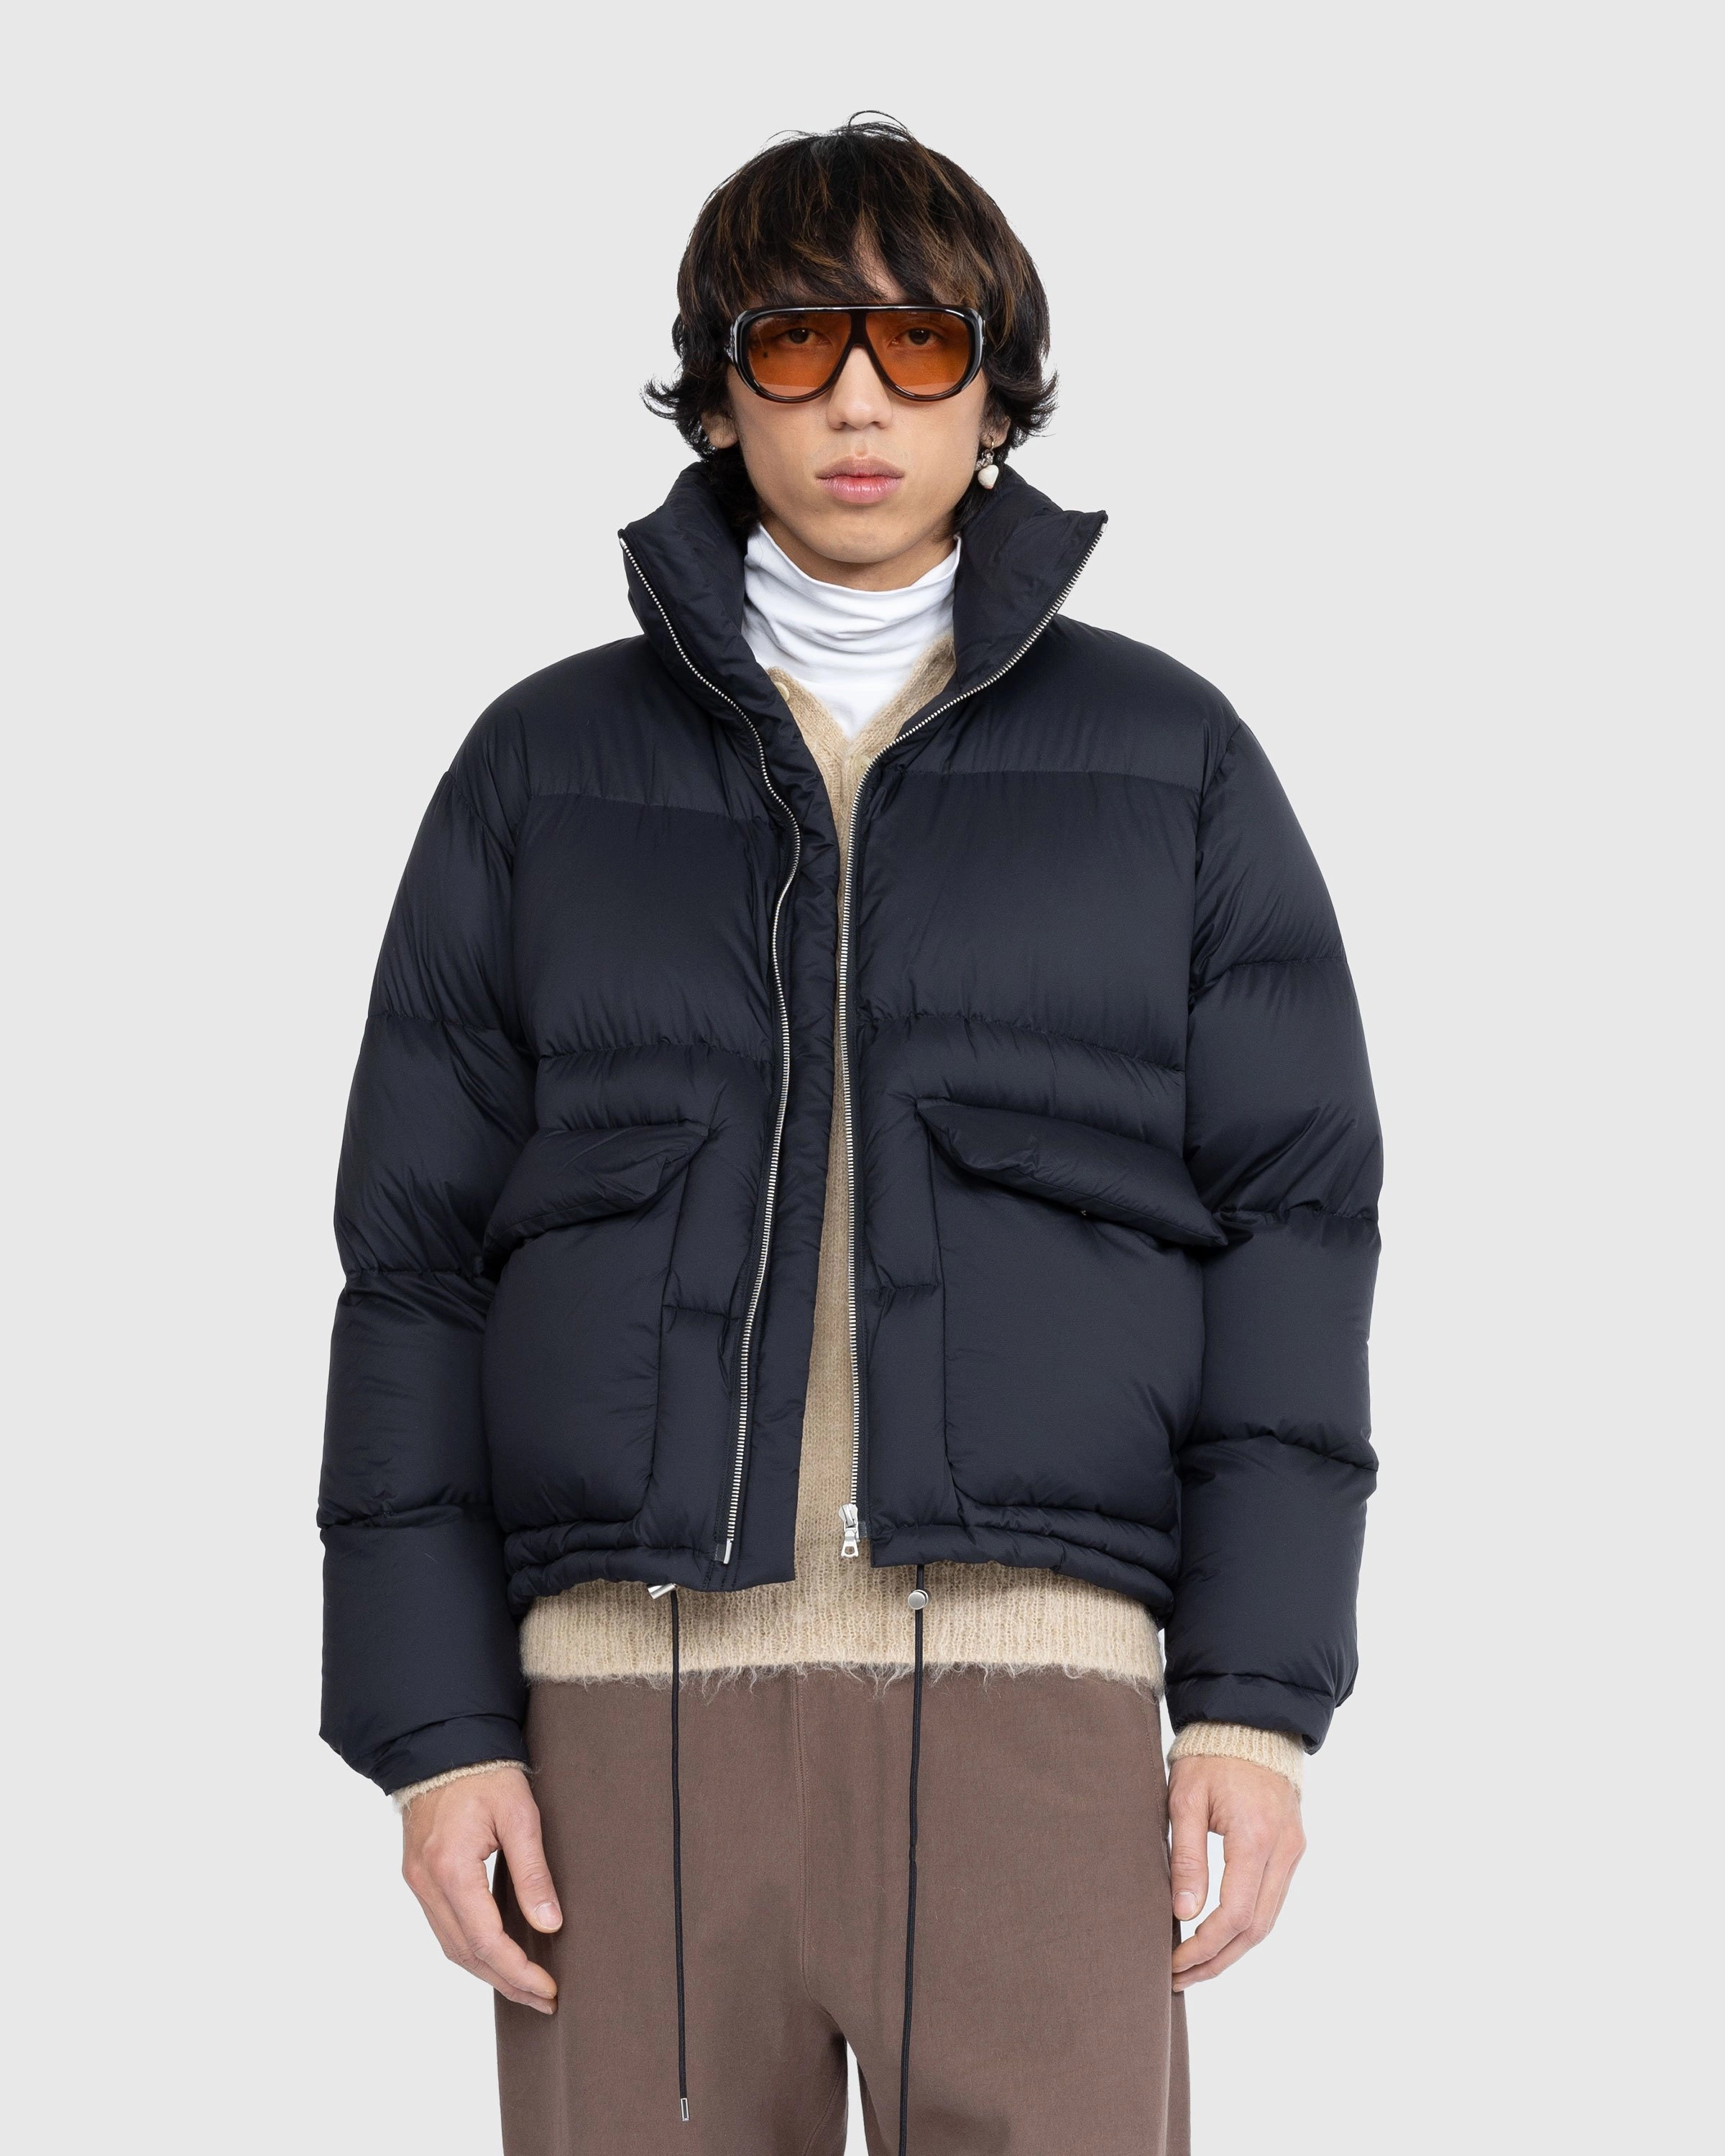 Acne Studios, HIGHArt & More: Browse This Season's Latest Drops